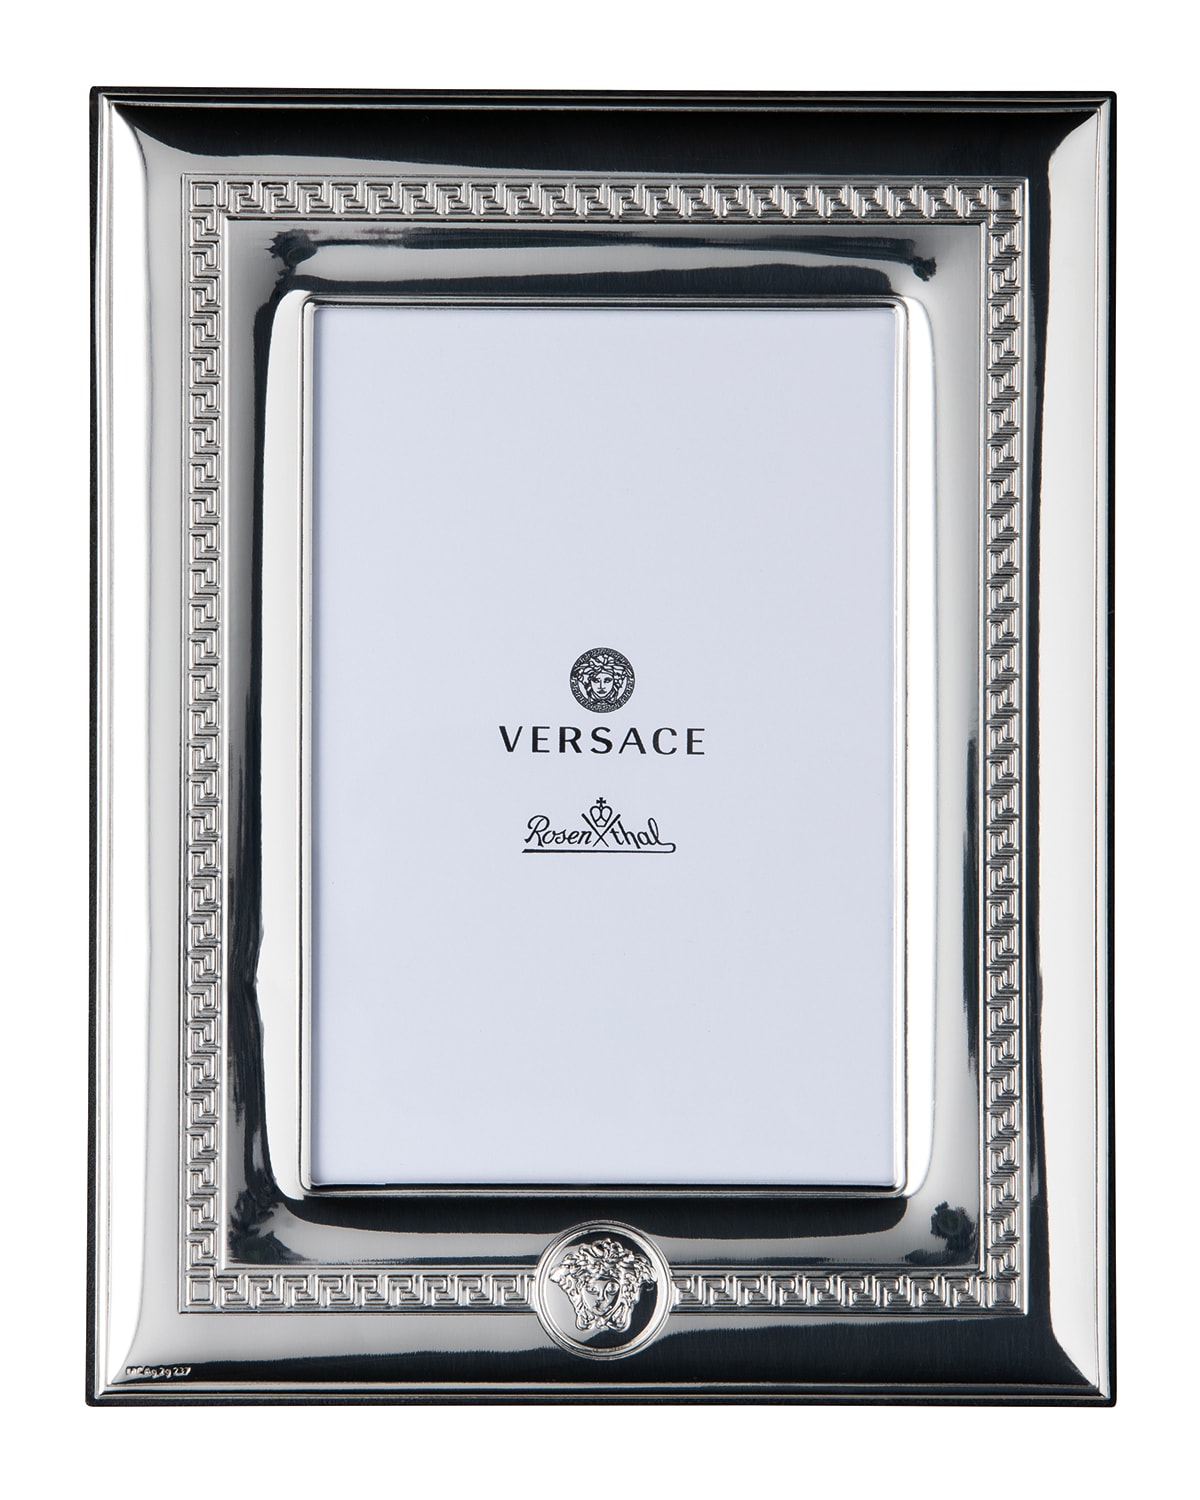 Versace Silver Plate Photo Frame, 4" X 6" In Metallic